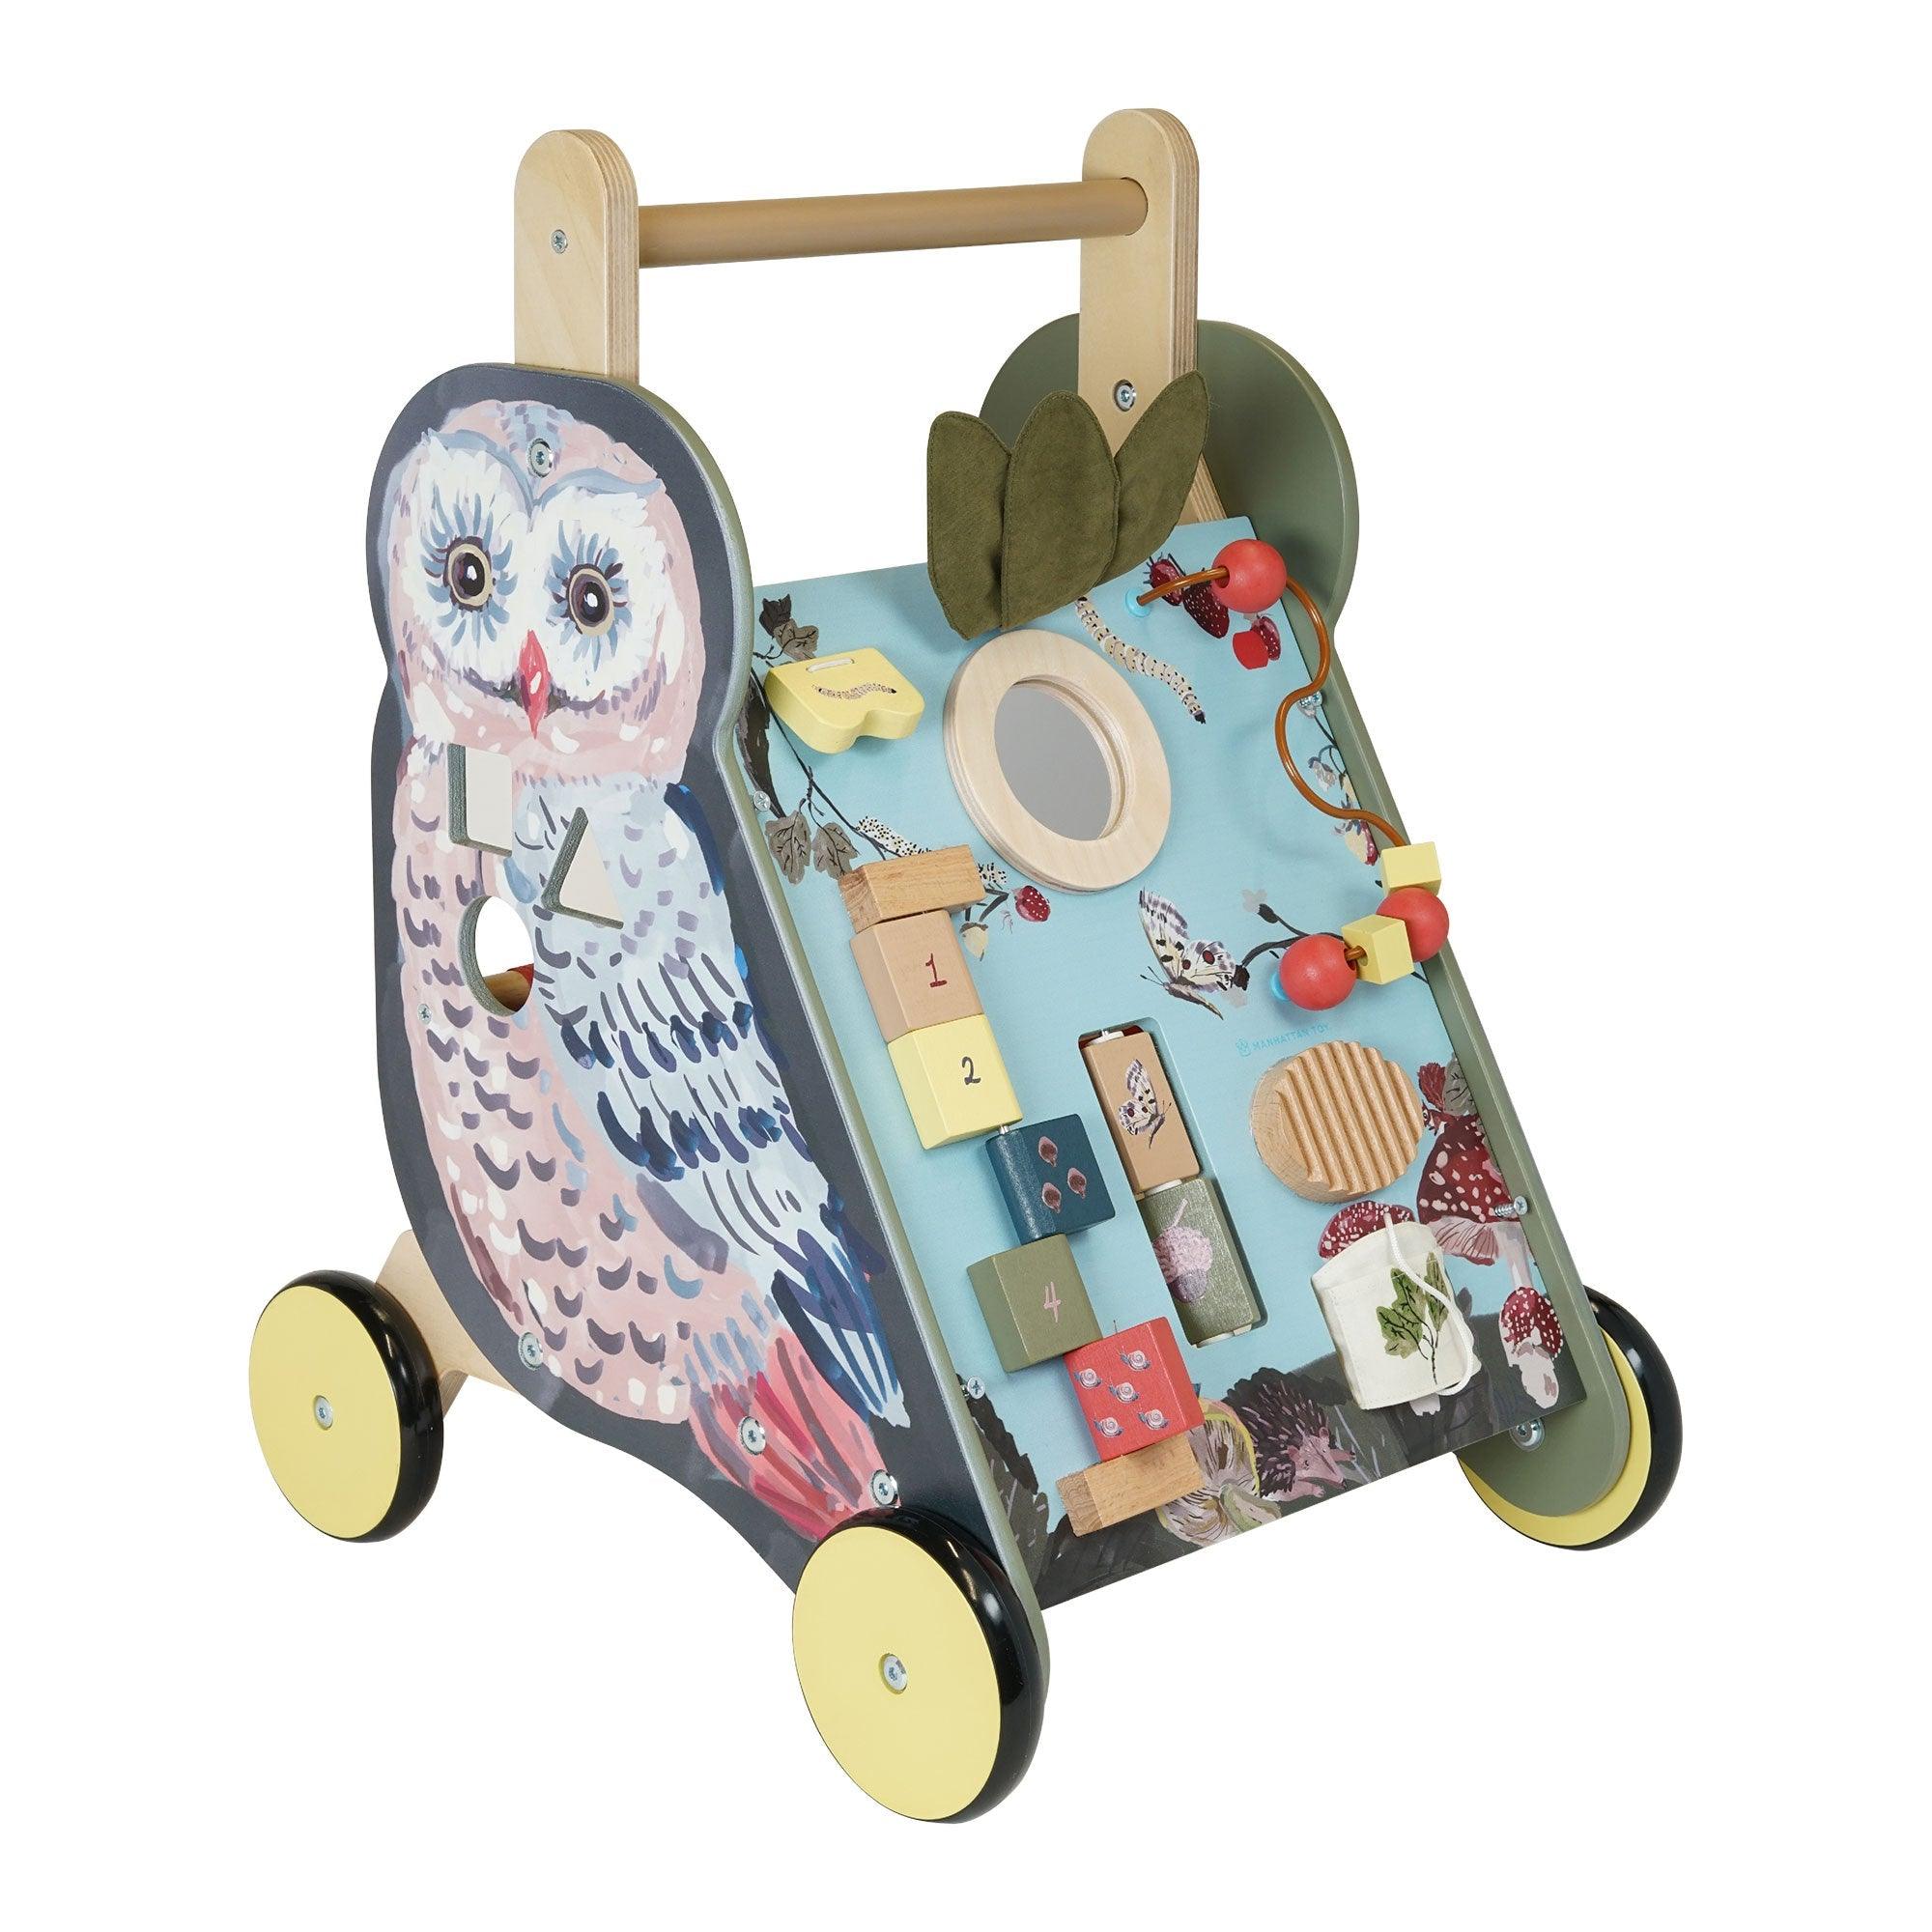 Wildwoods Owl Push-Cart - Why and Whale